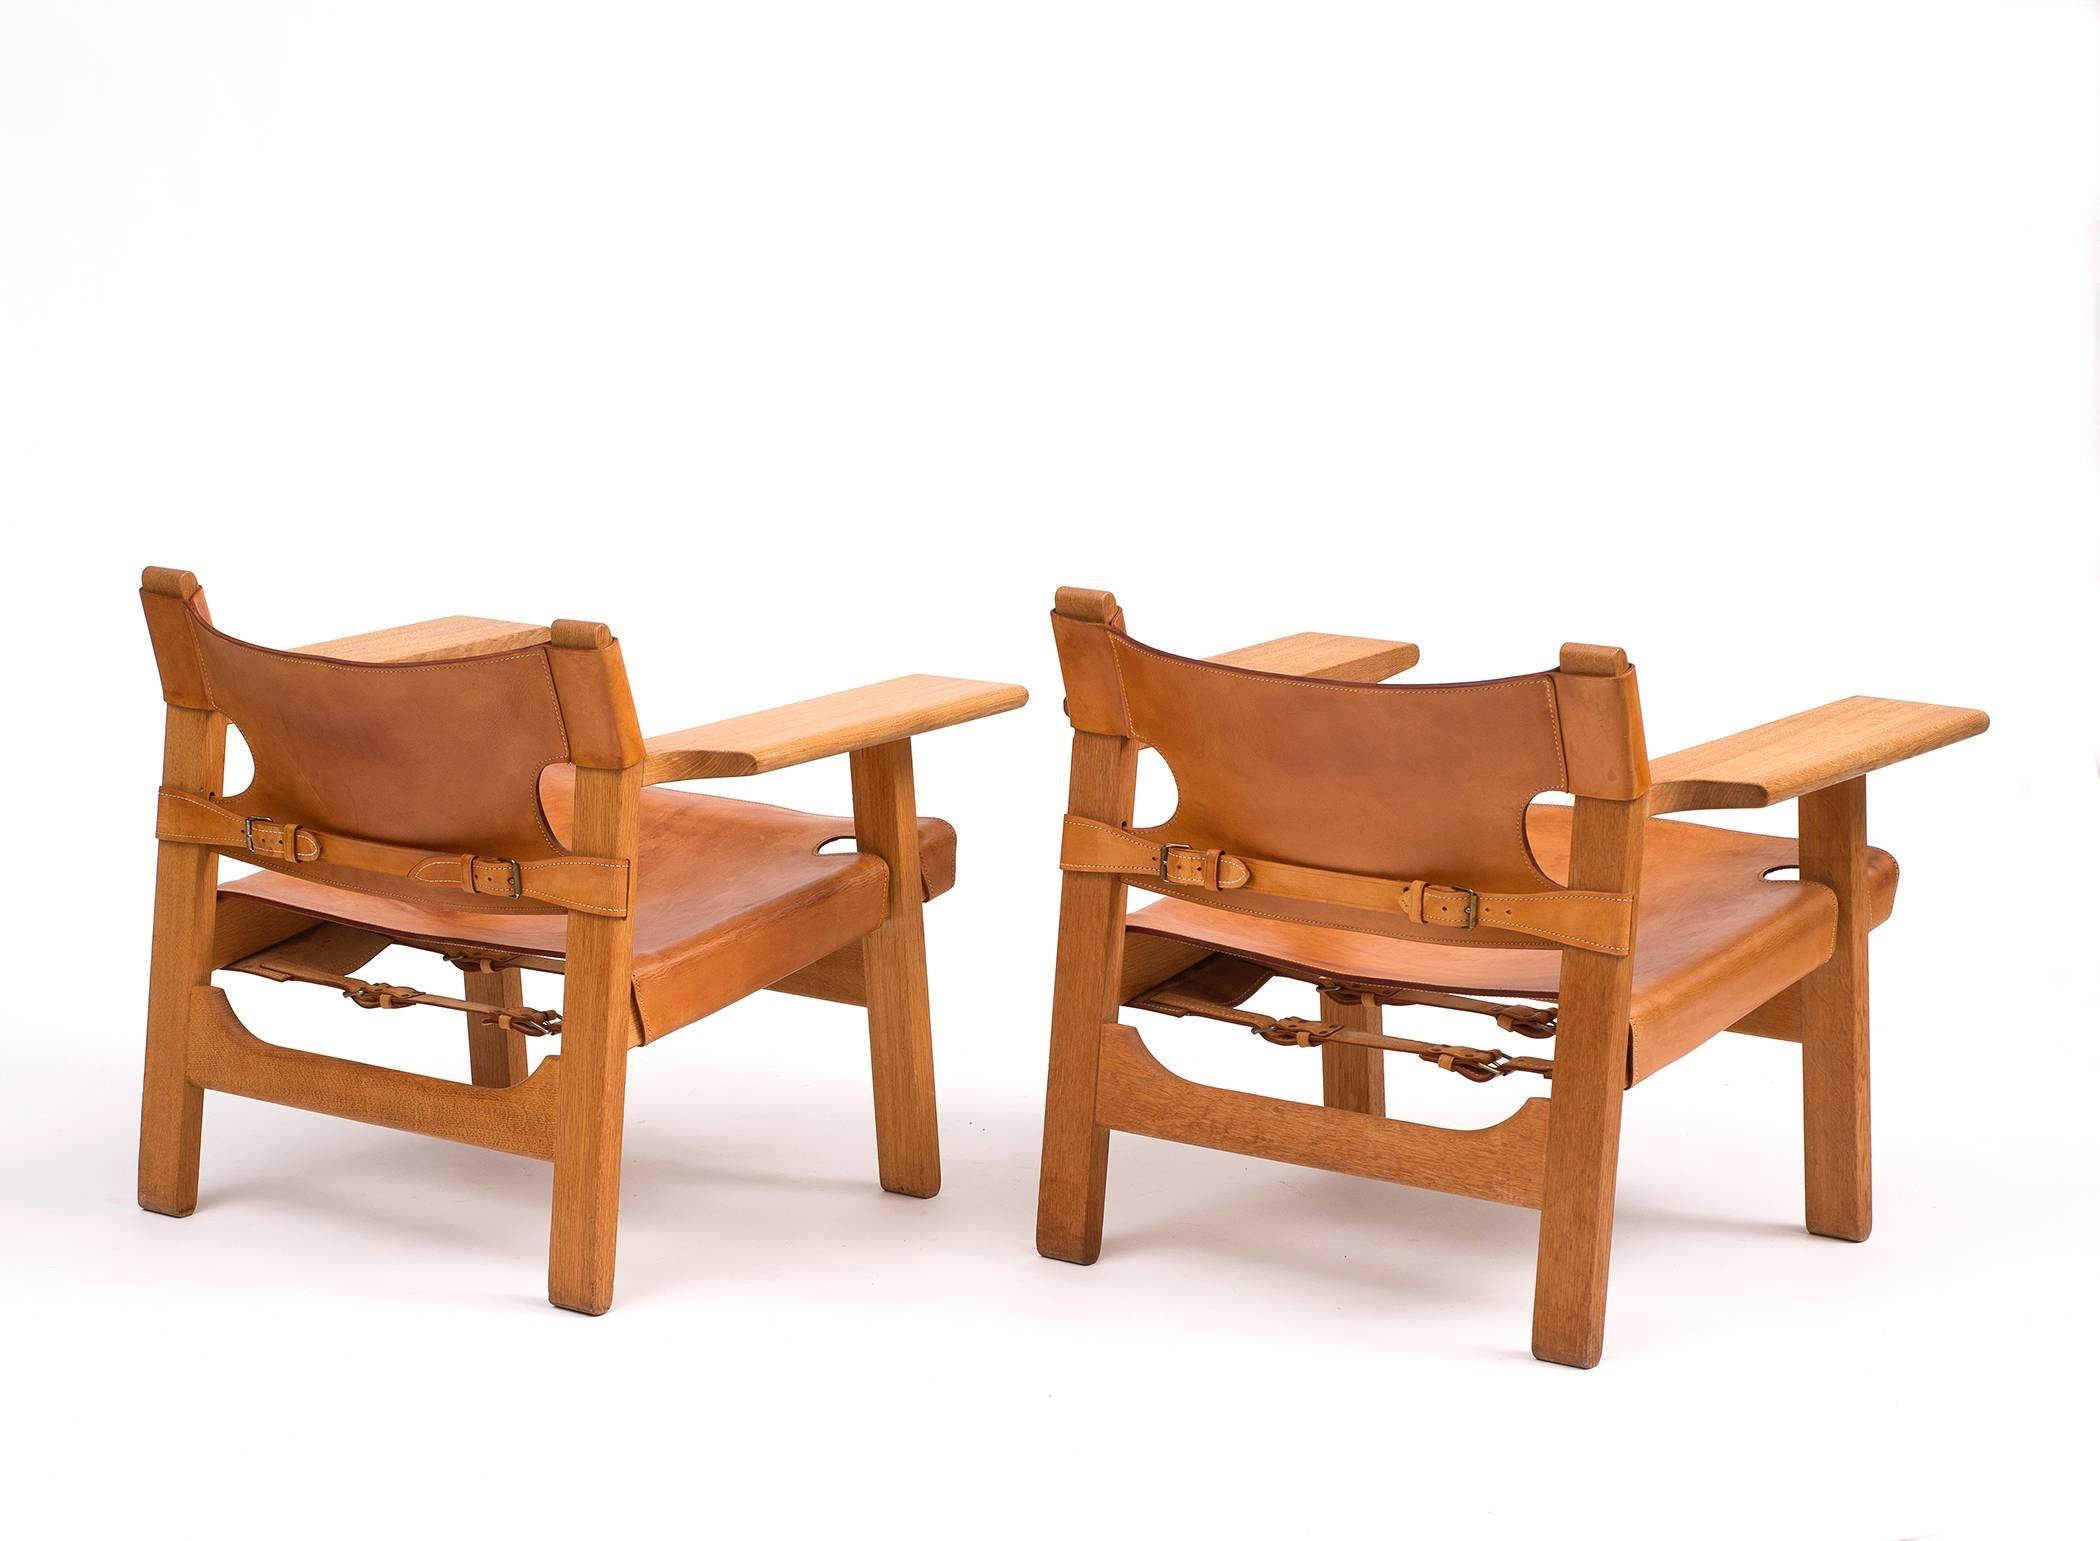 A pair of Spanish chairs by Borge Mogensen designed in 1958 for Fredericia Stolefabrik in Denmark. In oak and cognac leather.